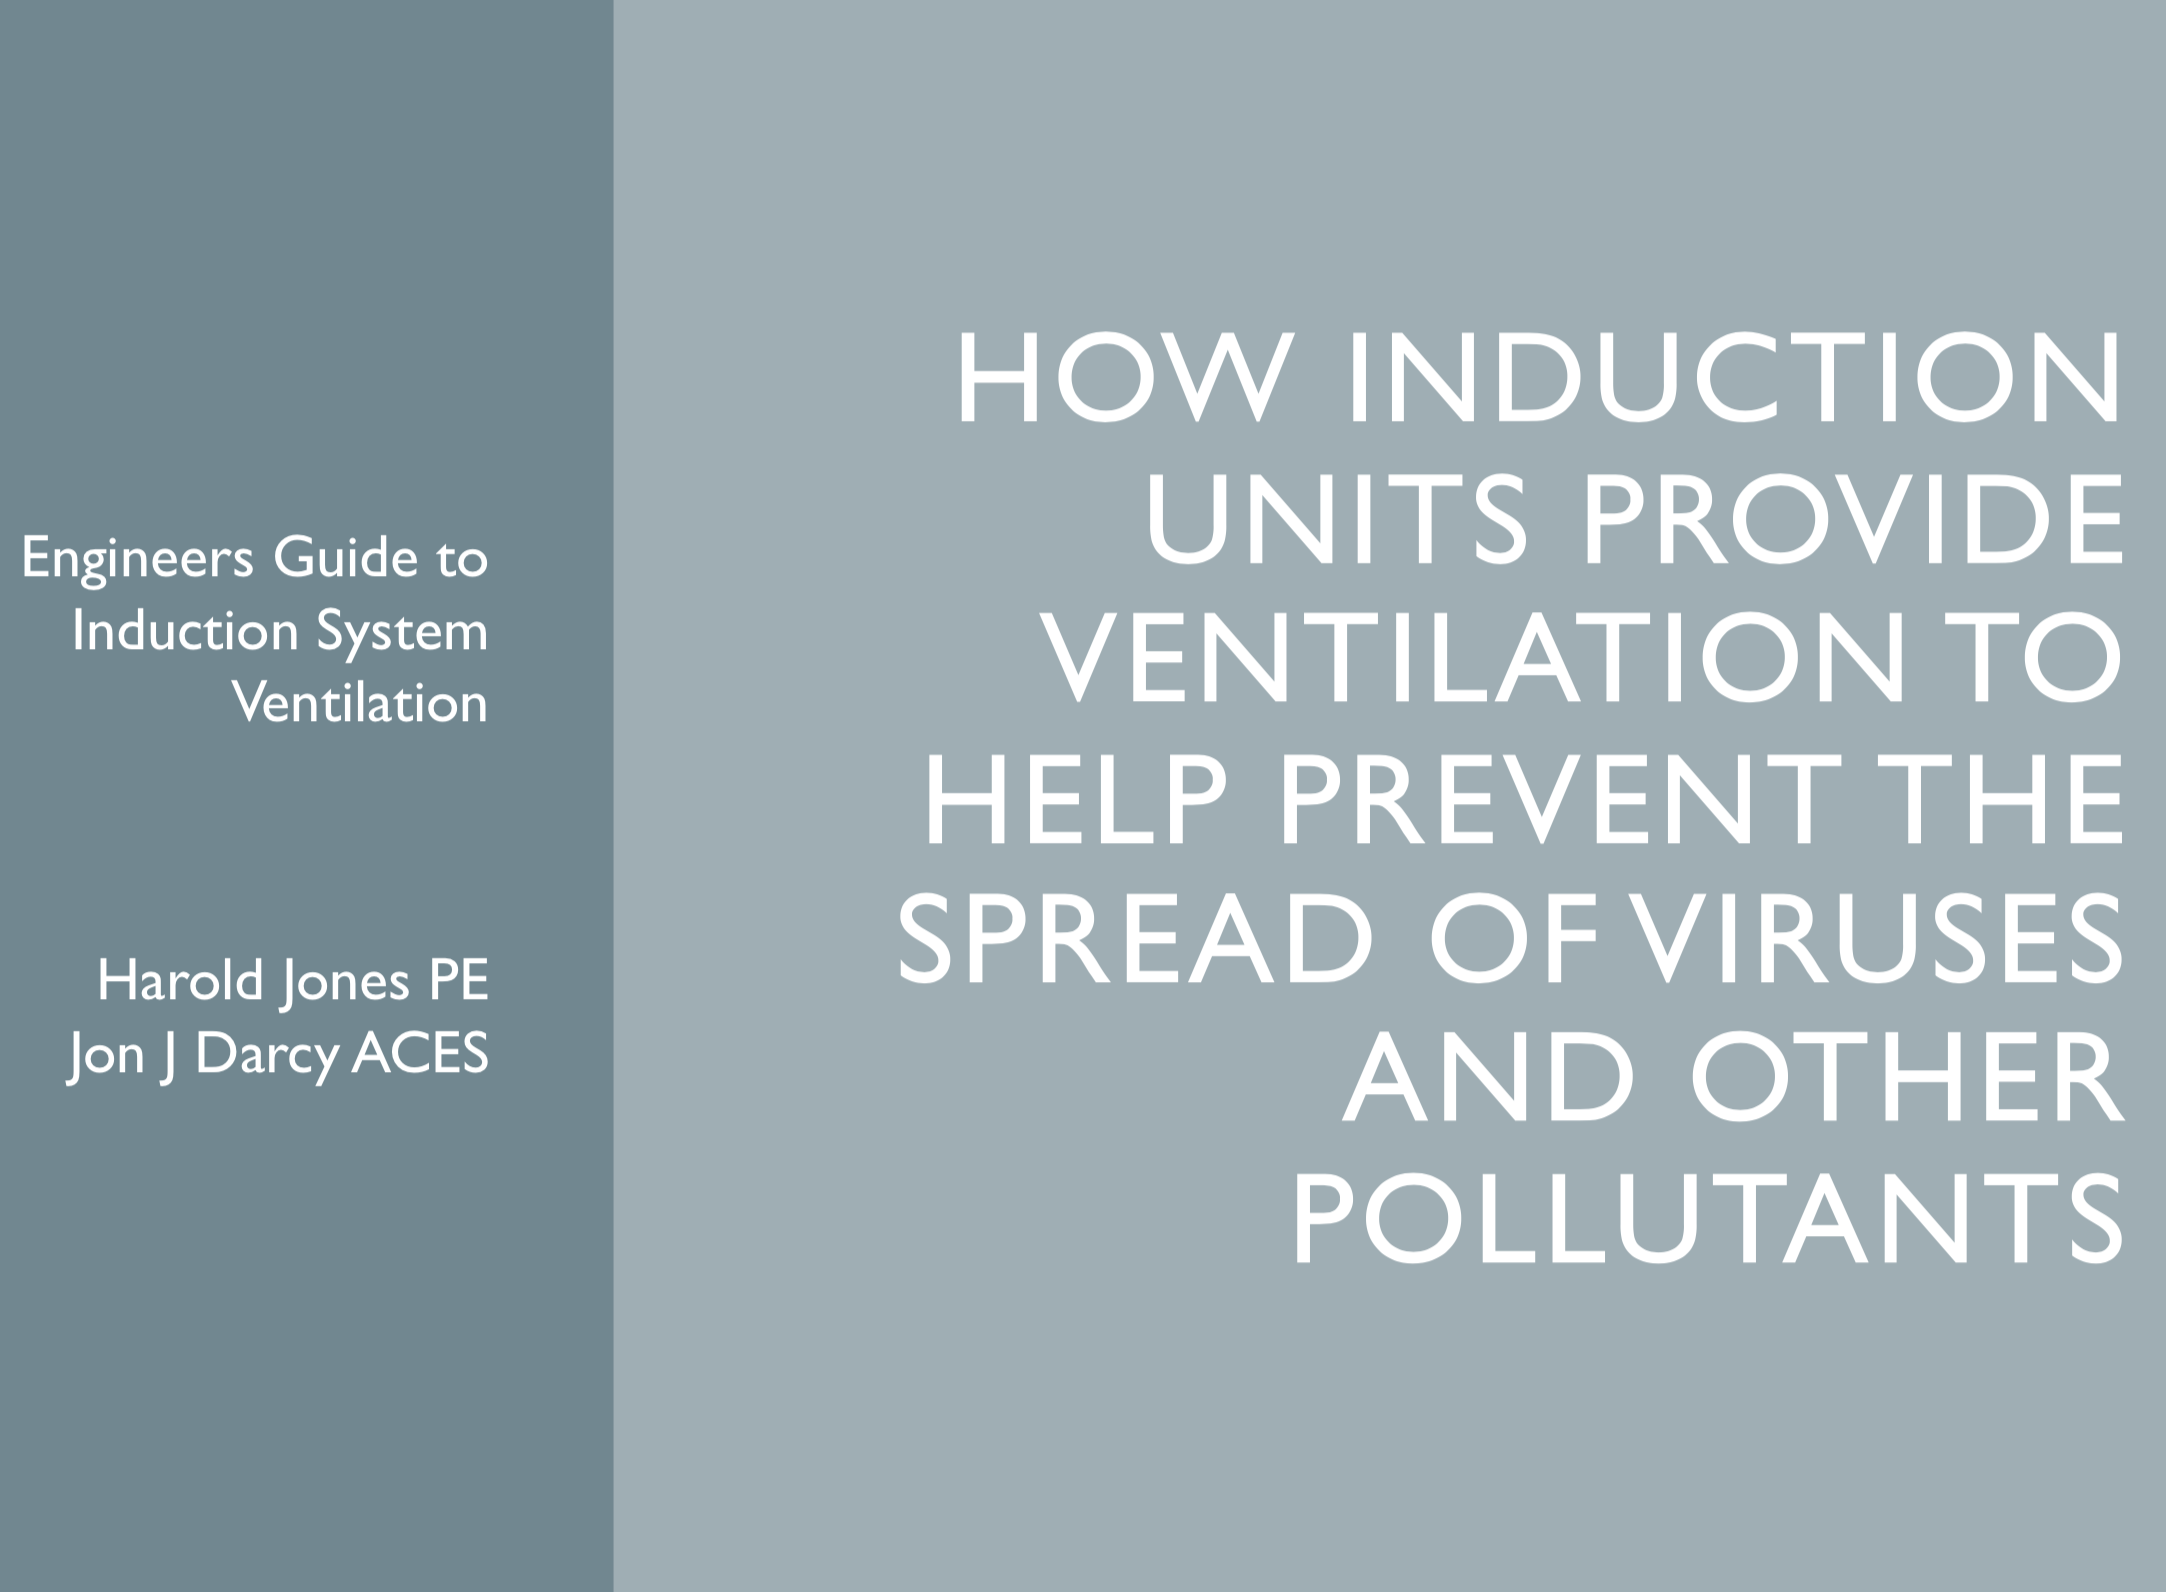 How Induction Unit Ventilation Can Help Prevent Virus and Pollutant Spread